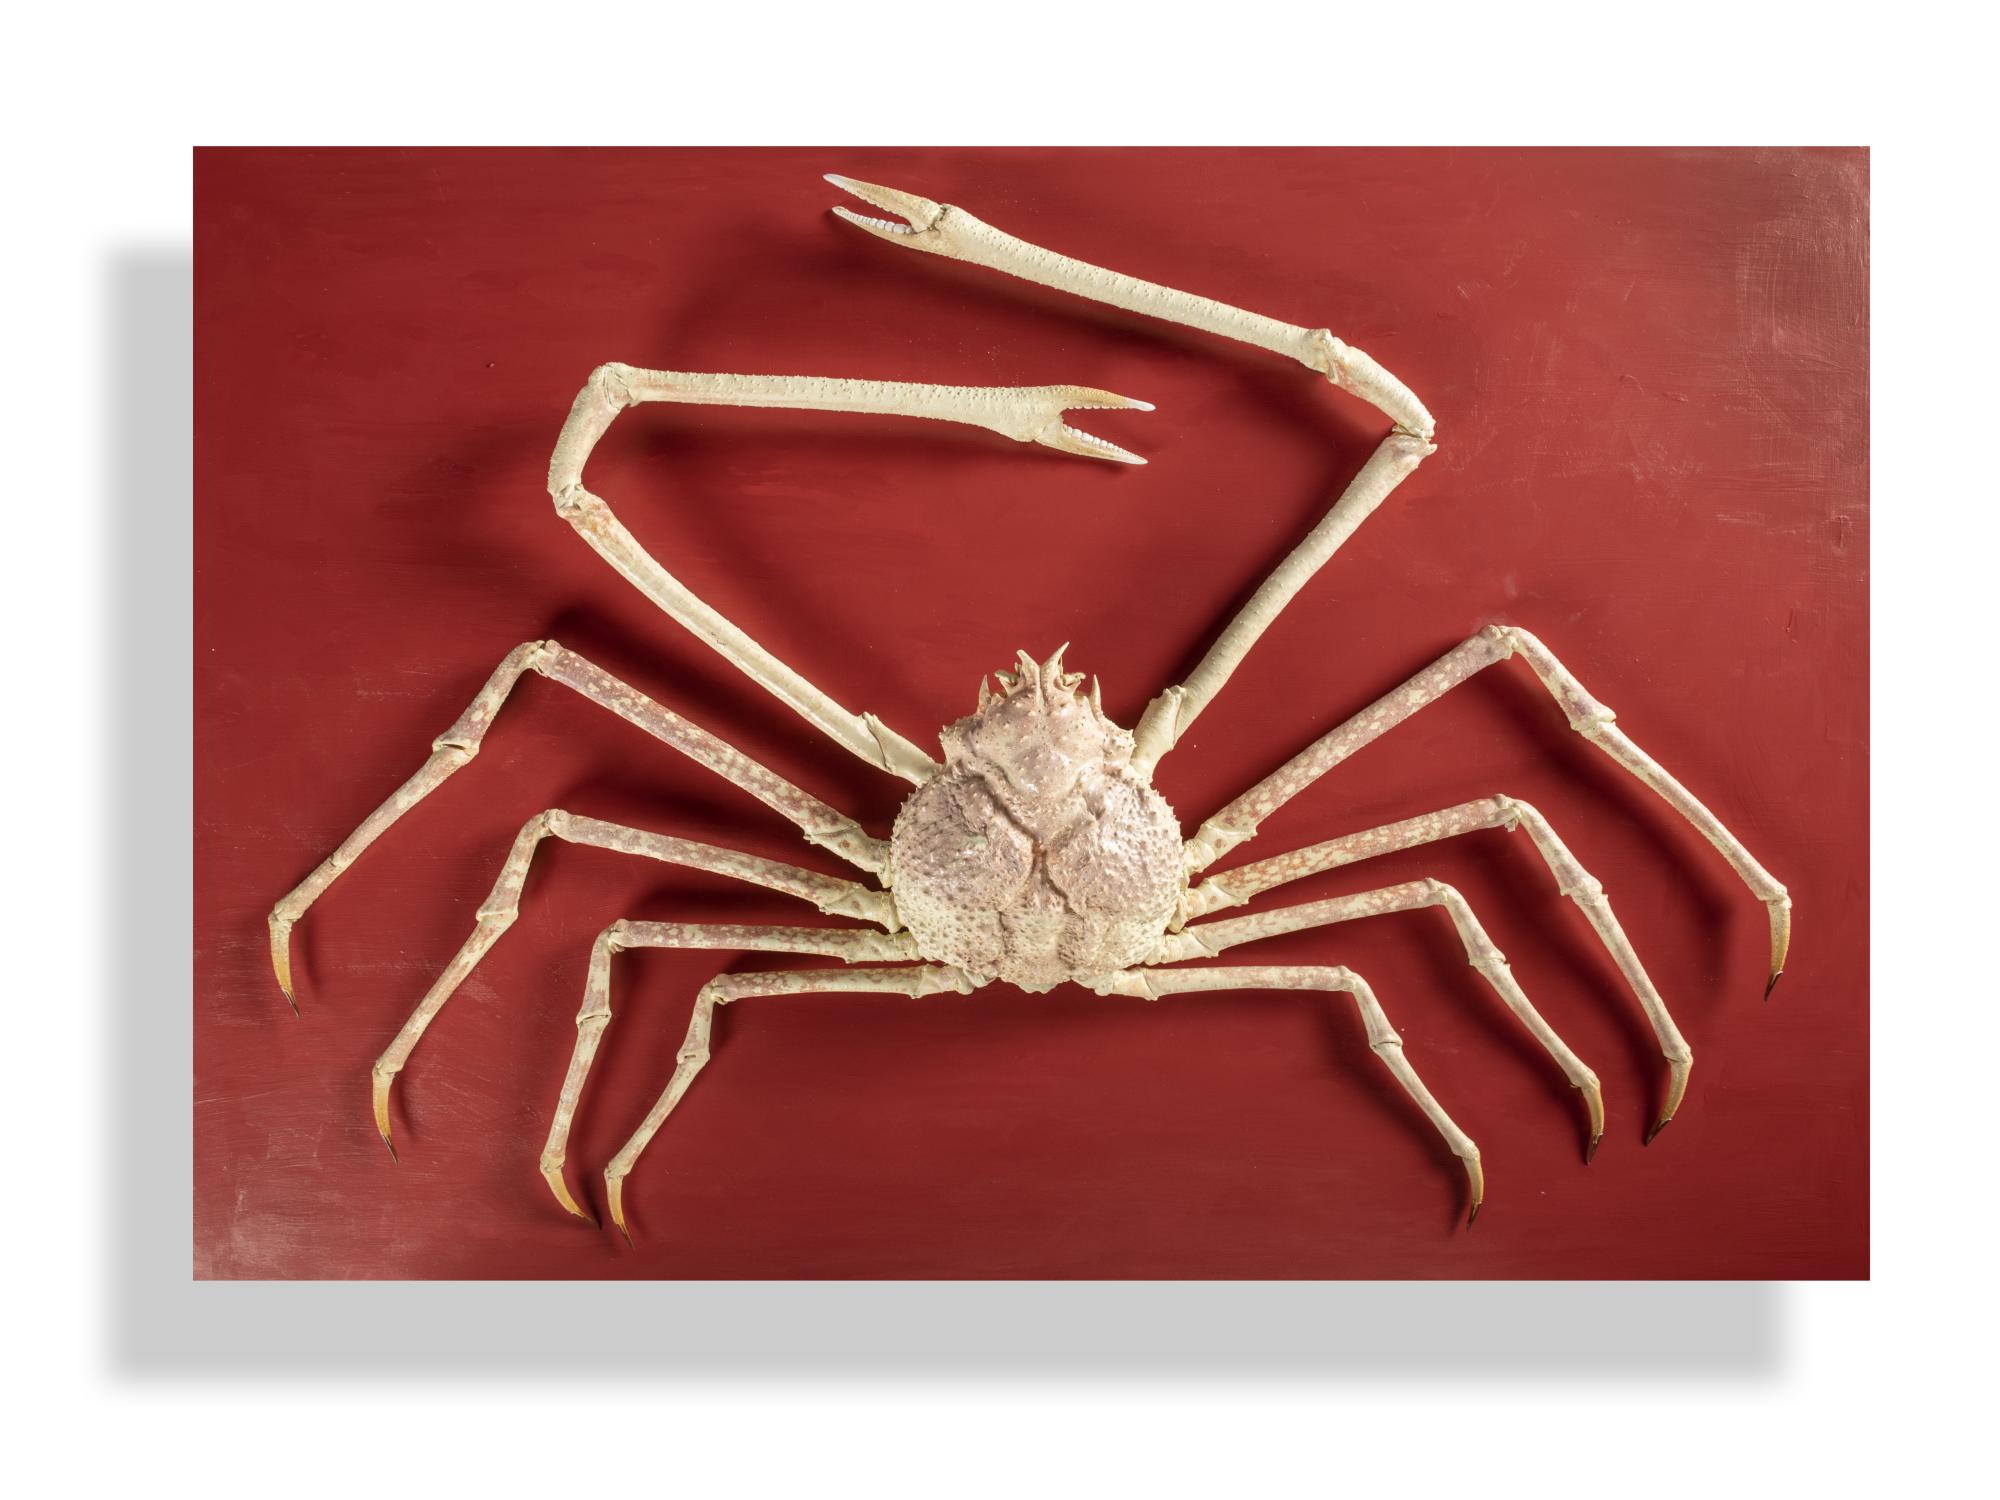 A rare giant Japanese spider crab